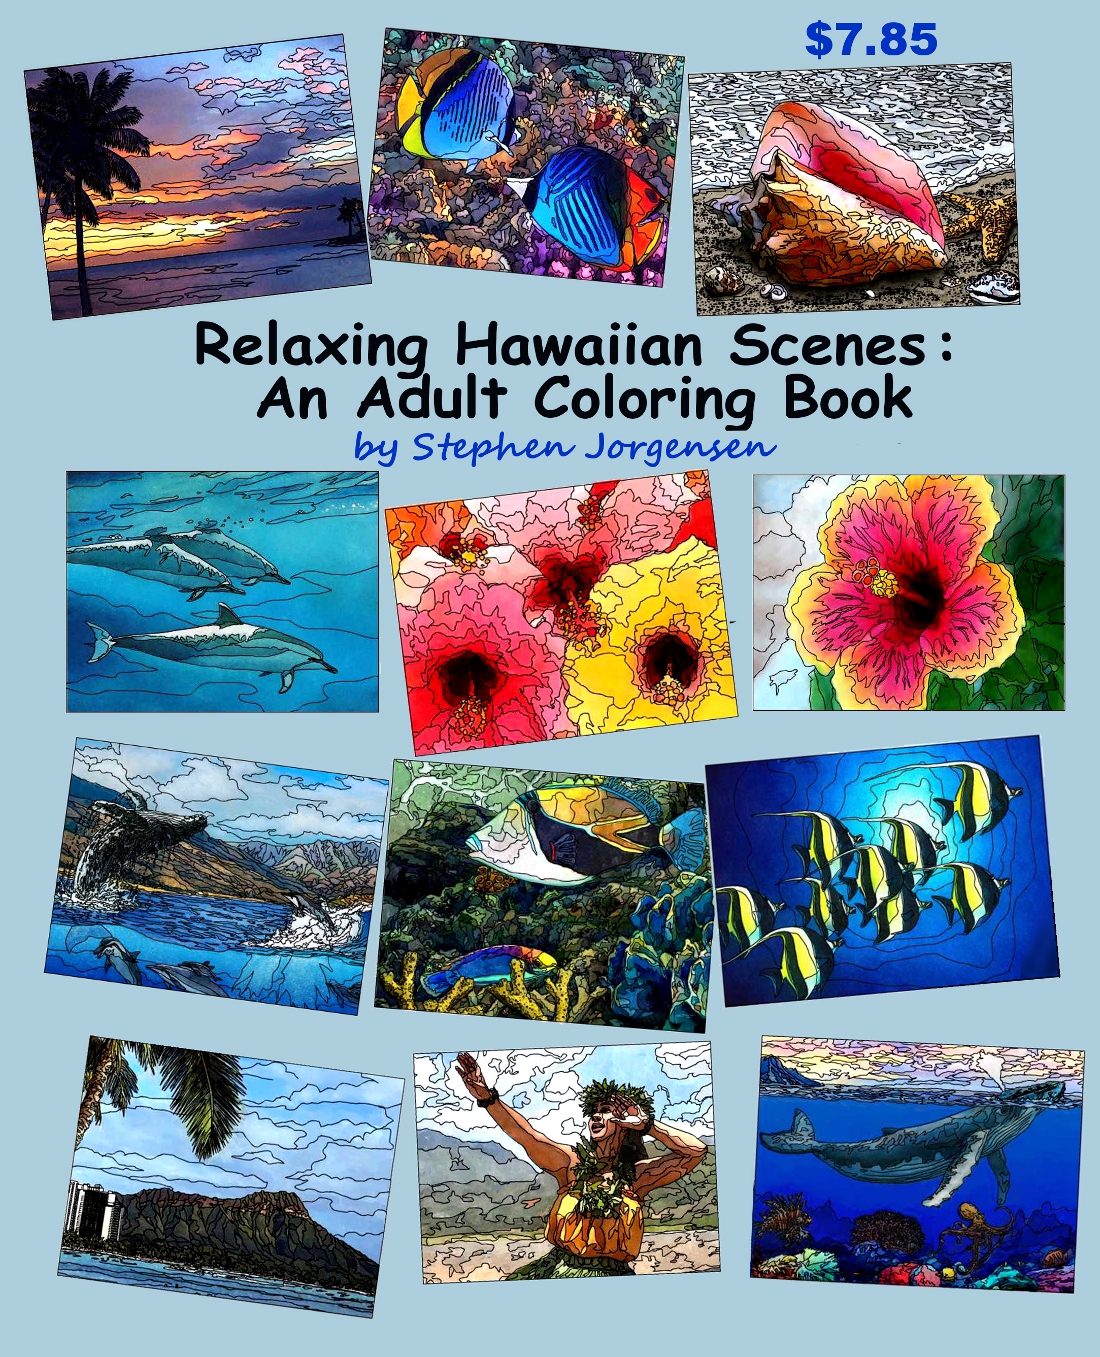 FREE: Relaxing Hawaiian Scenes: An Adult Coloring Book by Stephen Jorgensen